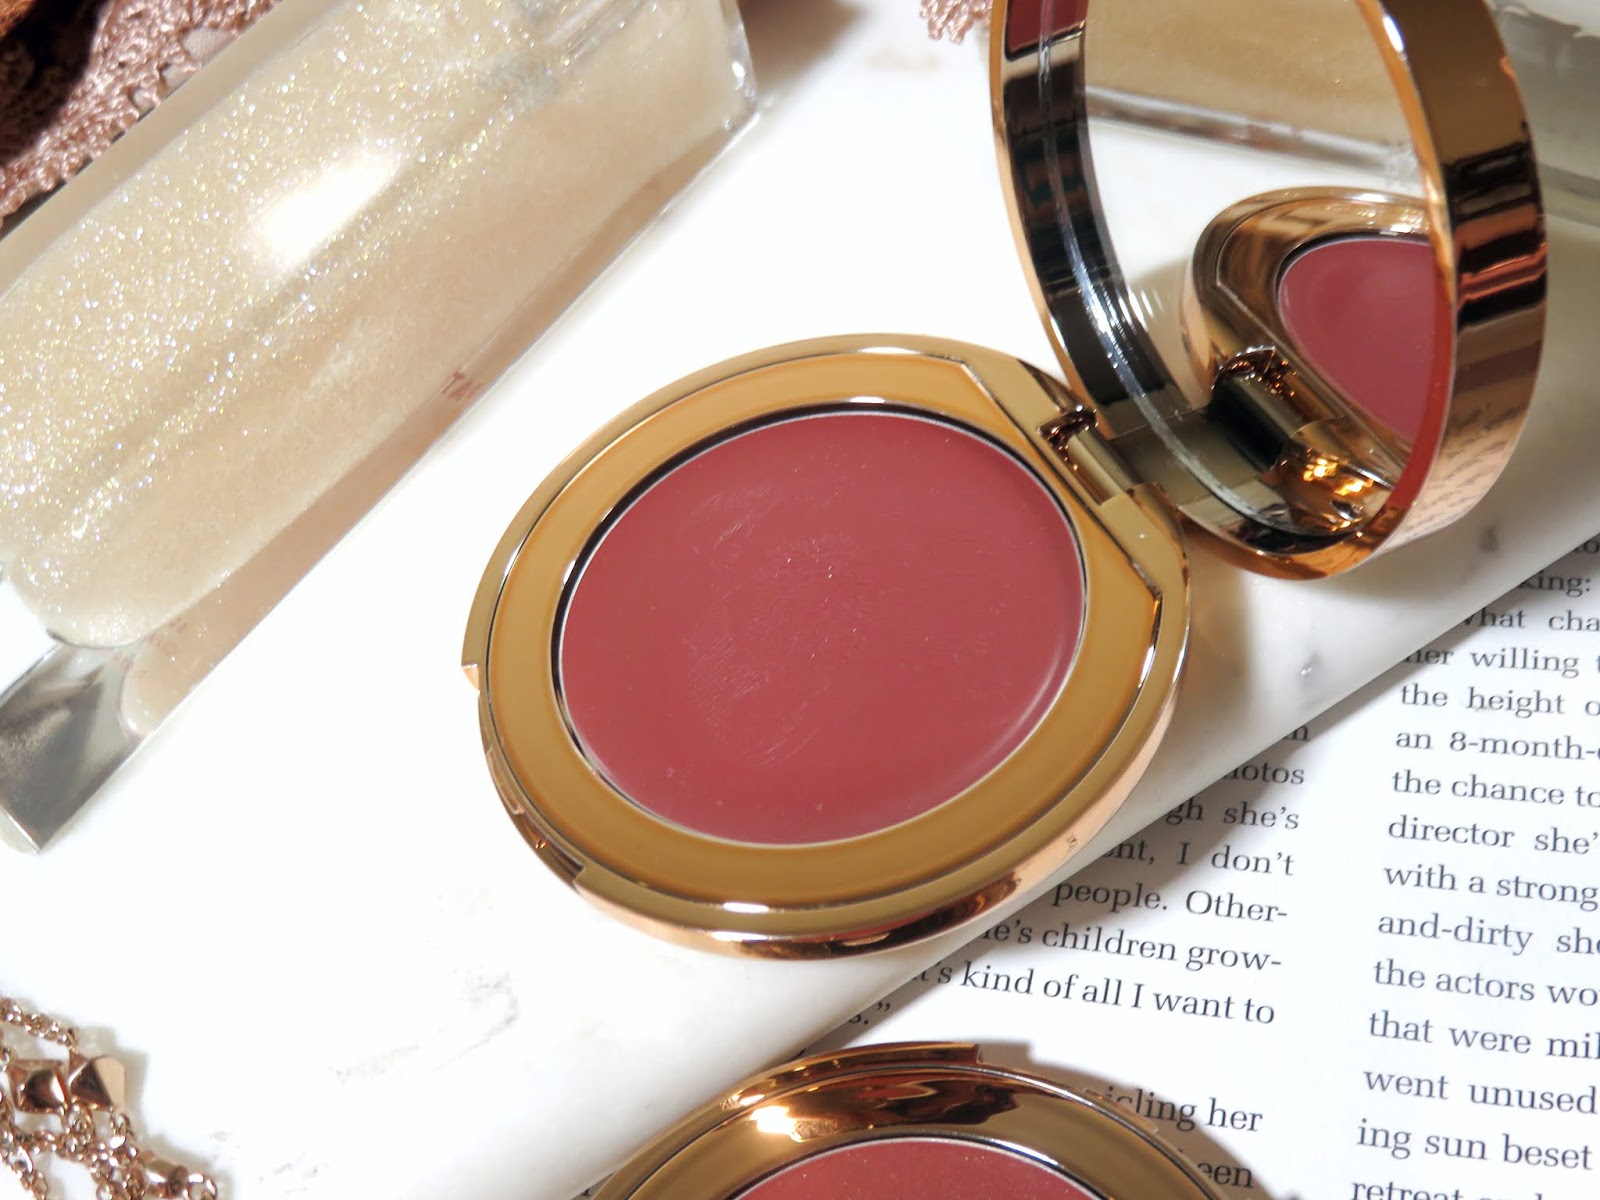 Charlotte Tilbury Pillow Talk Lip & Cheek Glow Review and Swatches